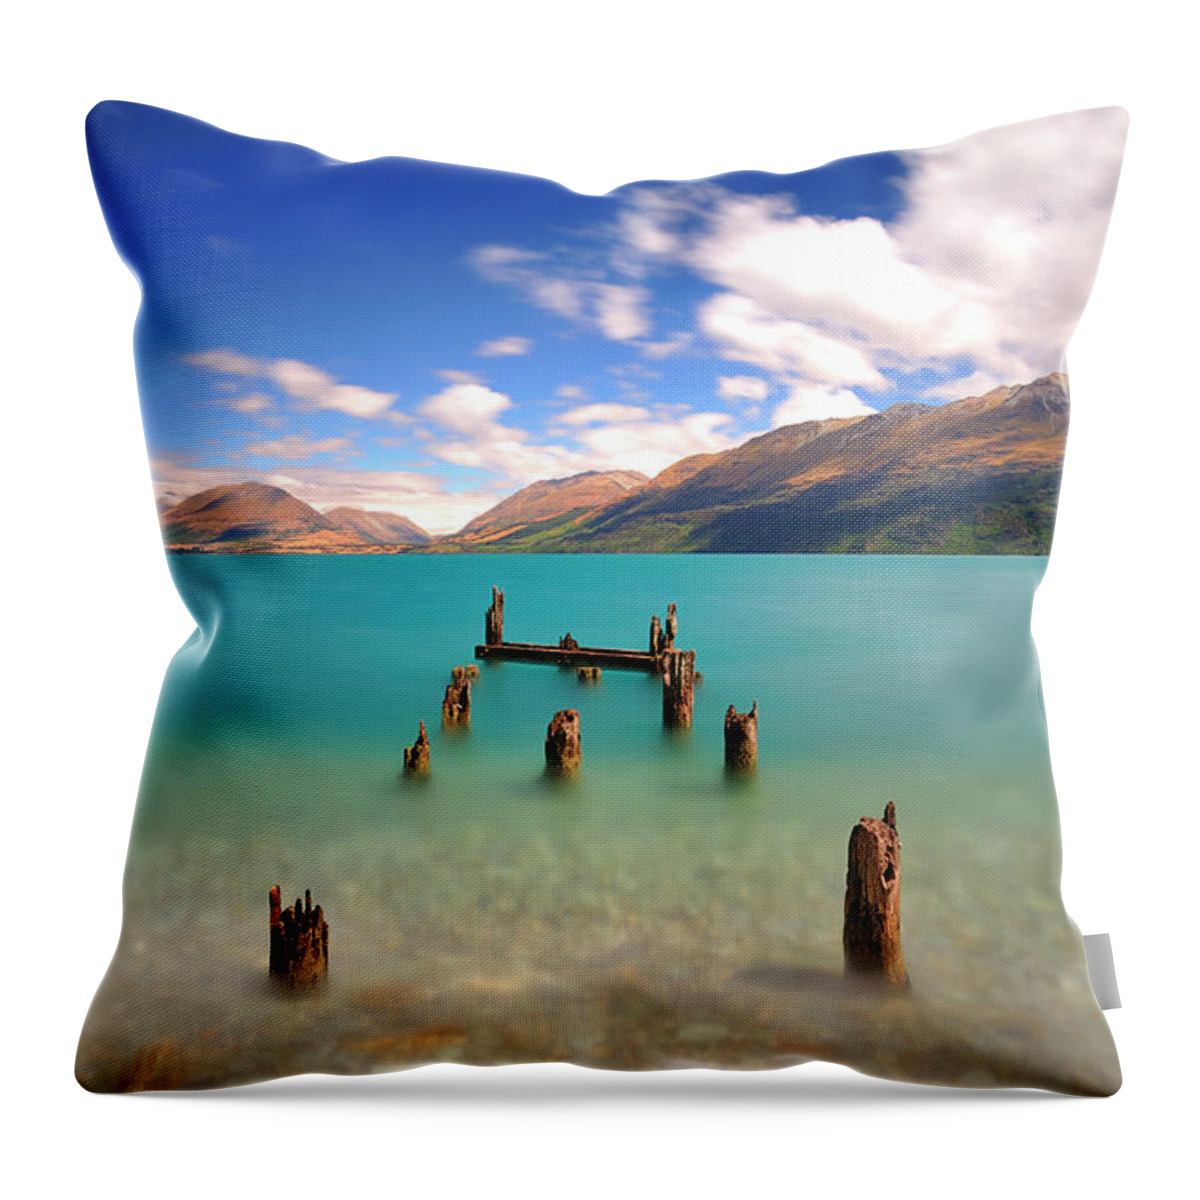 Tranquility Throw Pillow featuring the photograph Broken Pier At Sea by Photography By Anthony Ko